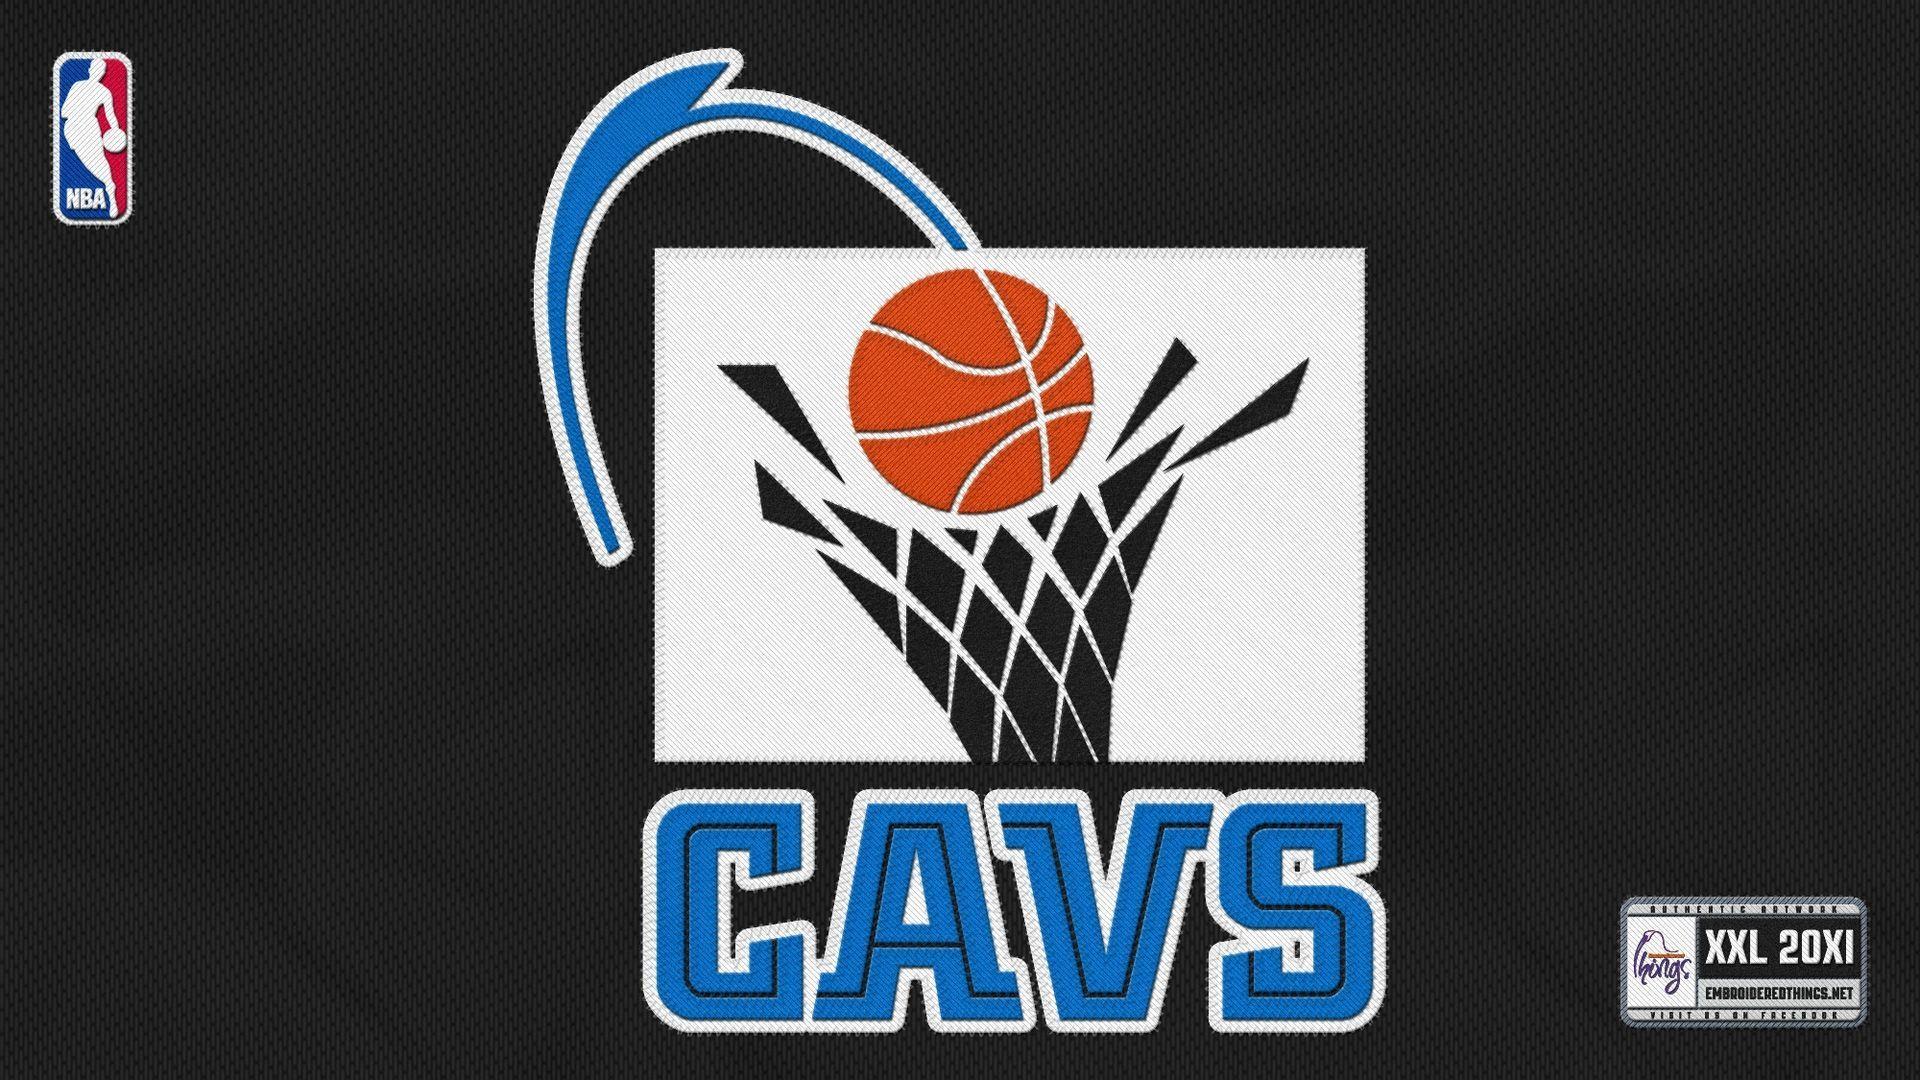 Cleveland Cavaliers Logo Wallpaper Free Download